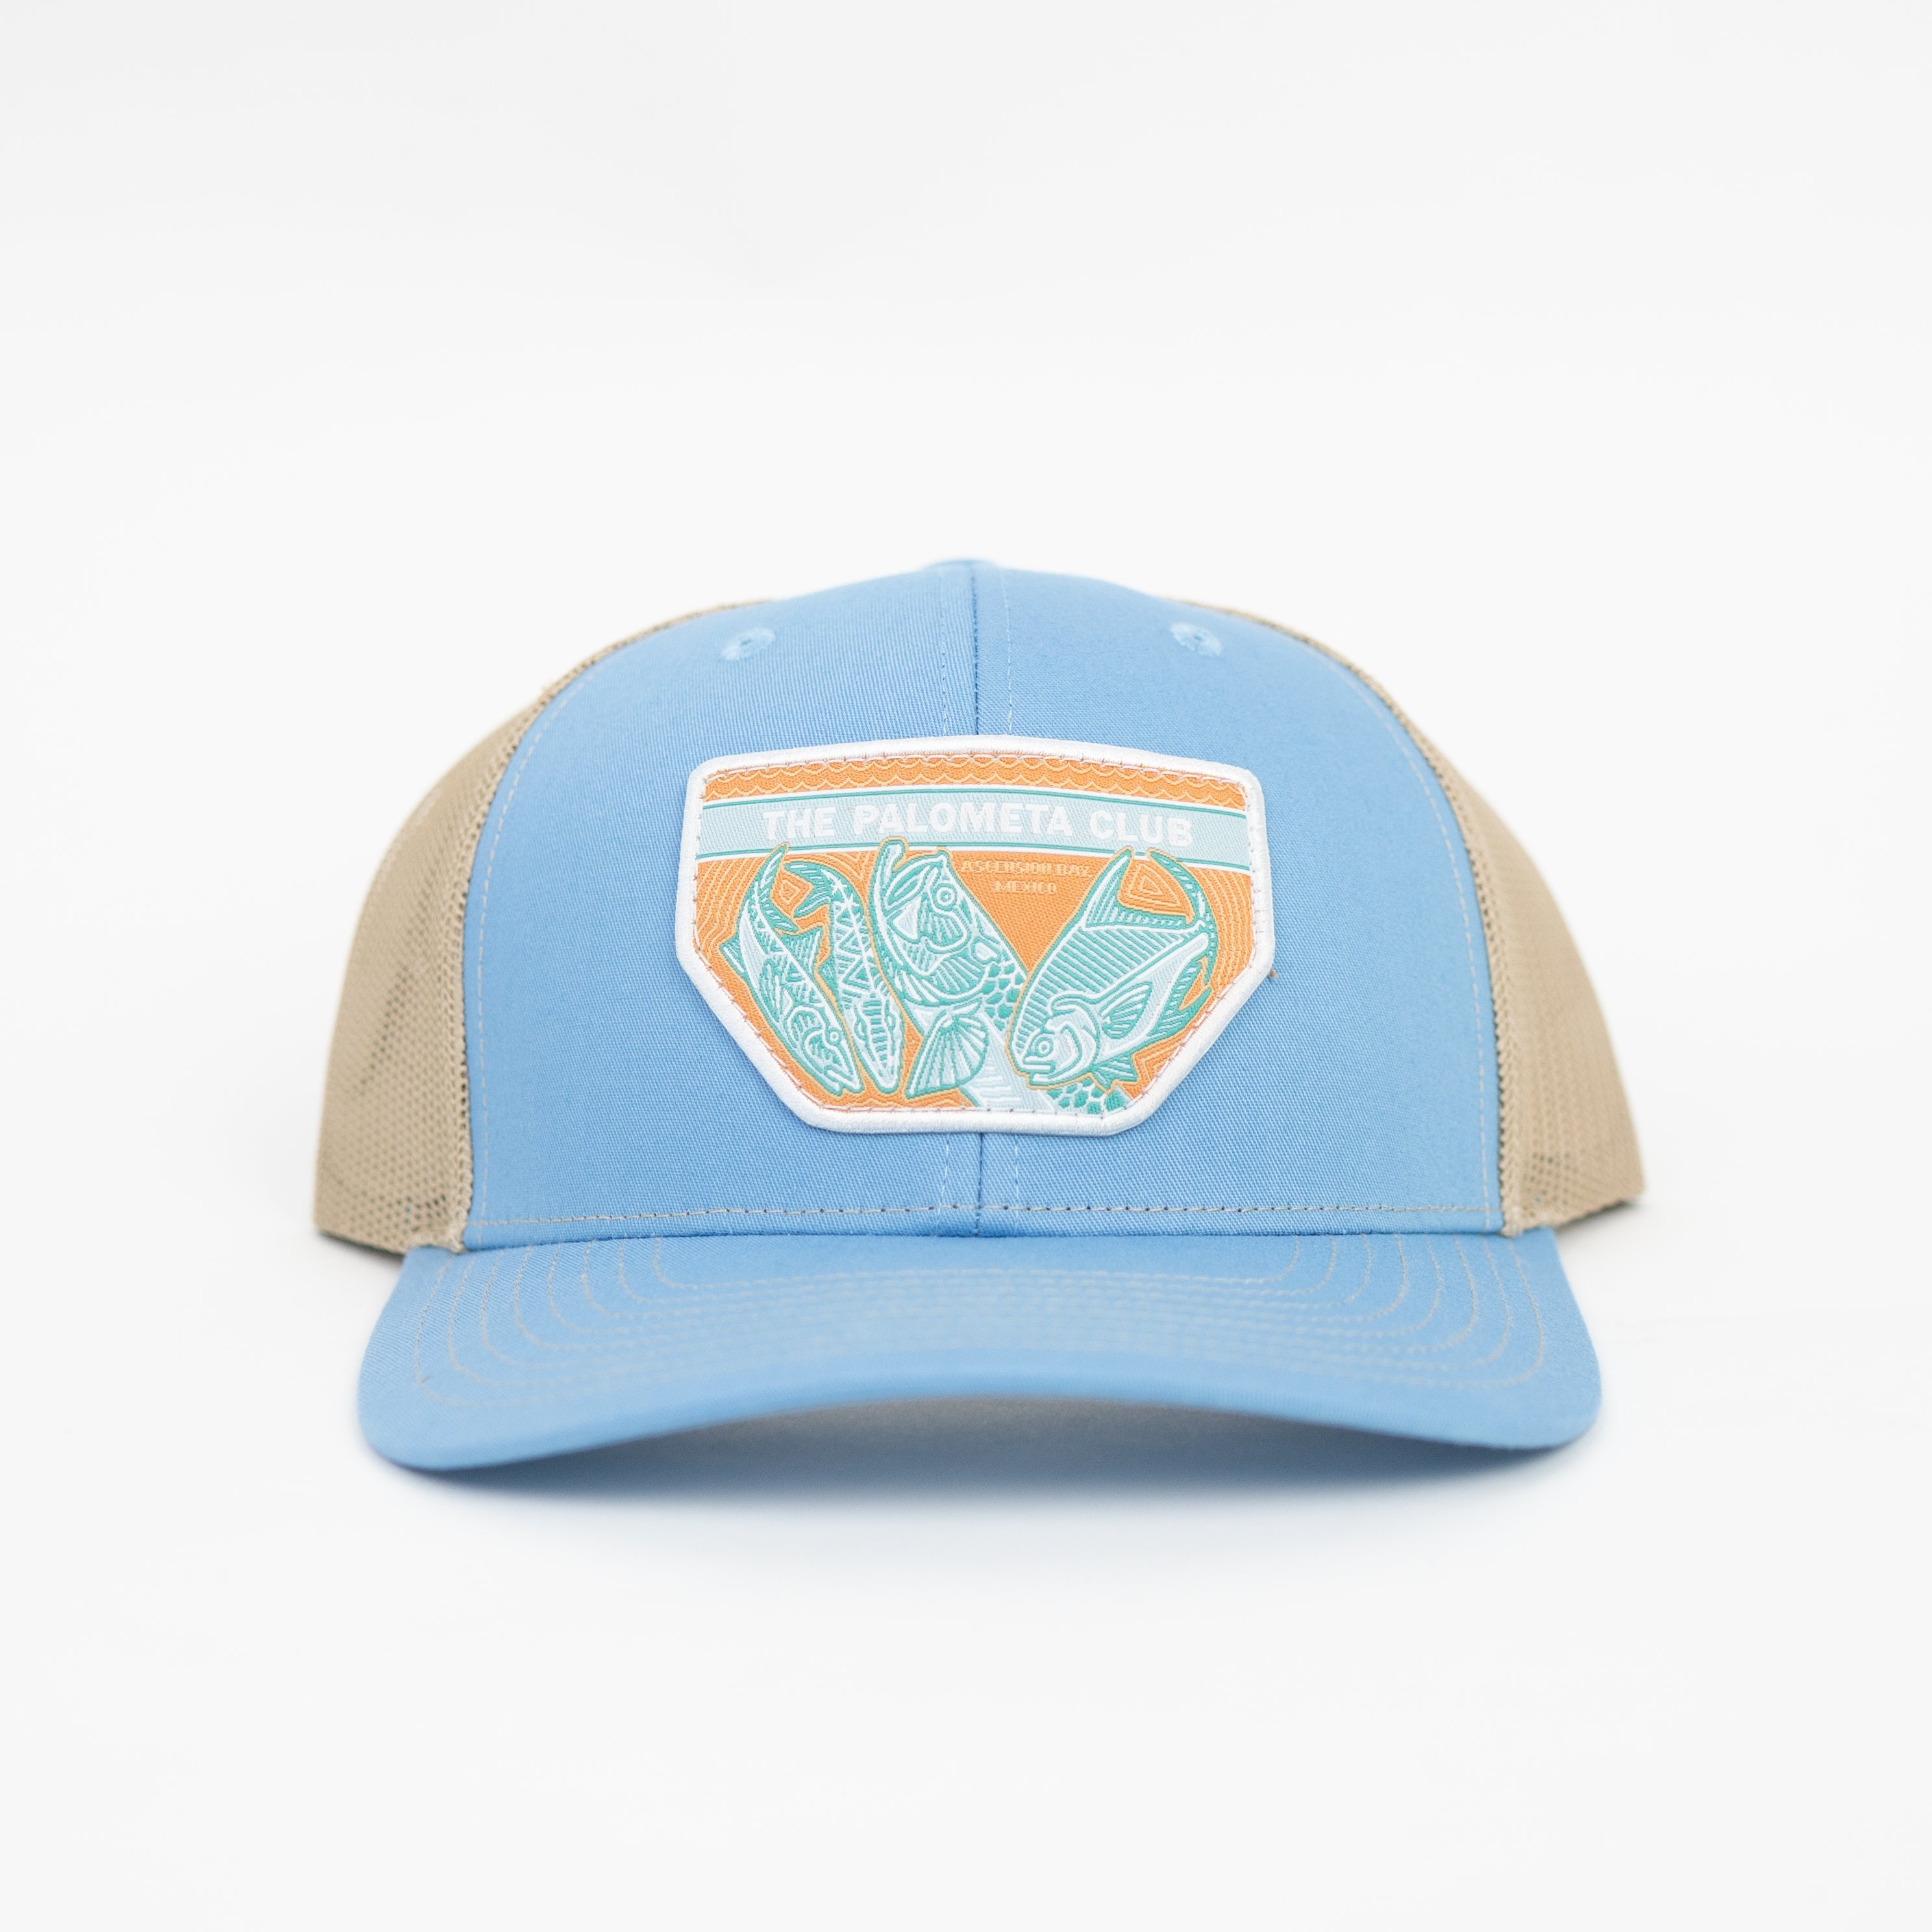 Tailwaters Fly Fishing X Casey Underwood Saltwater Slam Hat